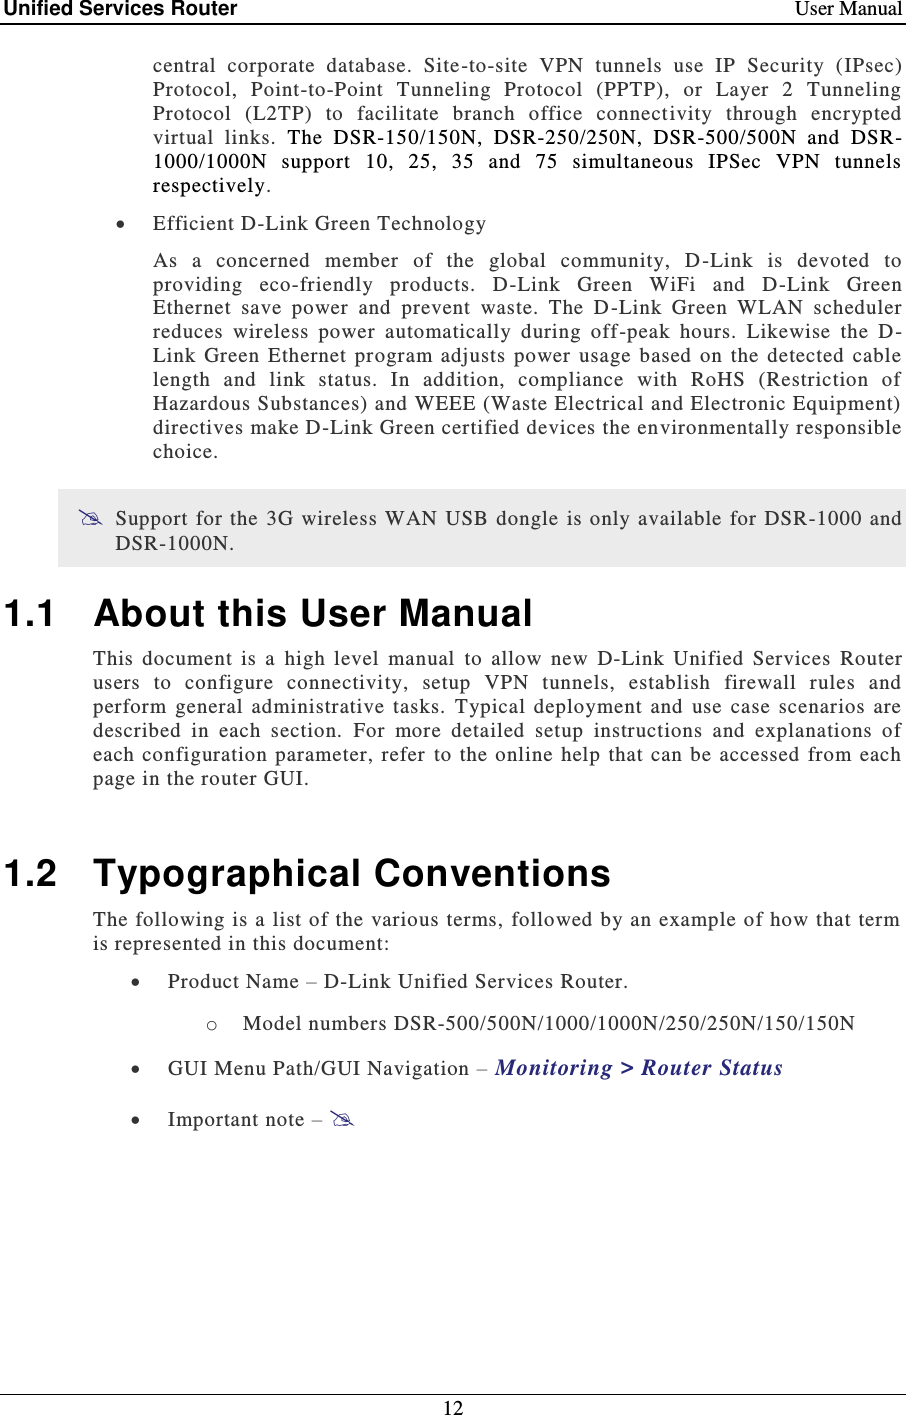 Unified Services Router    User Manual 12  central  corporate  database.  Site-to-site  VPN  tunnels  use  IP  Security  (IPsec) Protocol,  Point-to-Point  Tunneling  Protocol  (PPTP),  or  Layer  2  Tunneling Protocol  (L2TP)  to  facilitate  branch  office  connectivity  through  encrypted virtual  links.  The  DSR-150/150N,  DSR-250/250N,  DSR-500/500N  and  DSR-1000/1000N  support  10,  25,  35  and  75  simultaneous  IPSec  VPN  tunnels respectively.  Efficient D-Link Green Technology As  a  concerned  member  of  the  global  community,  D -Link  is  devoted  to providing  eco-friendly  products.  D-Link  Green  WiFi  and  D-Link  Green Ethernet  save  power  and  prevent  waste.  The  D-Link  Green  WLAN  scheduler reduces  wireless  power  automatically  during  off -peak  hours.  Likewise  the  D -Link  Green  Ethernet  program  adjusts  power  usage  based  on  the  detected  cable length  and  link  status.  In  addition,  compliance  with  RoHS  (Restriction  of Hazardous Substances) and WEEE (Waste Electrical and Electronic Equipment) directives make D-Link Green certified devices the environmentally responsible choice.  Support for  the 3G wireless WAN  USB dongle is only available  for DSR-1000  and DSR-1000N. 1.1  About this User Manual This  document  is  a  high  level  manual  to  allow  new  D-Link  Unified  Services  Router users  to  configure  connectivity,  setup  VPN  tunnels,  establish  firewall  rules  and perform  general  administrative  tasks.  Typical  deployment  and  use  case  scenarios  are described  in  each  section.  For  more  detailed  setup  instructions  and  explanations  of each configuration  parameter, refer  to the  online  help  that  can  be  accessed  from  each page in the router GUI.  1.2  Typographical Conventions The following is a list of the  various terms,  followed by an example of how that term is represented in this document:   Product Name – D-Link Unified Services Router.  o Model numbers DSR-500/500N/1000/1000N/250/250N/150/150N  GUI Menu Path/GUI Navigation – Monitoring &gt; Router Status  Important note –  